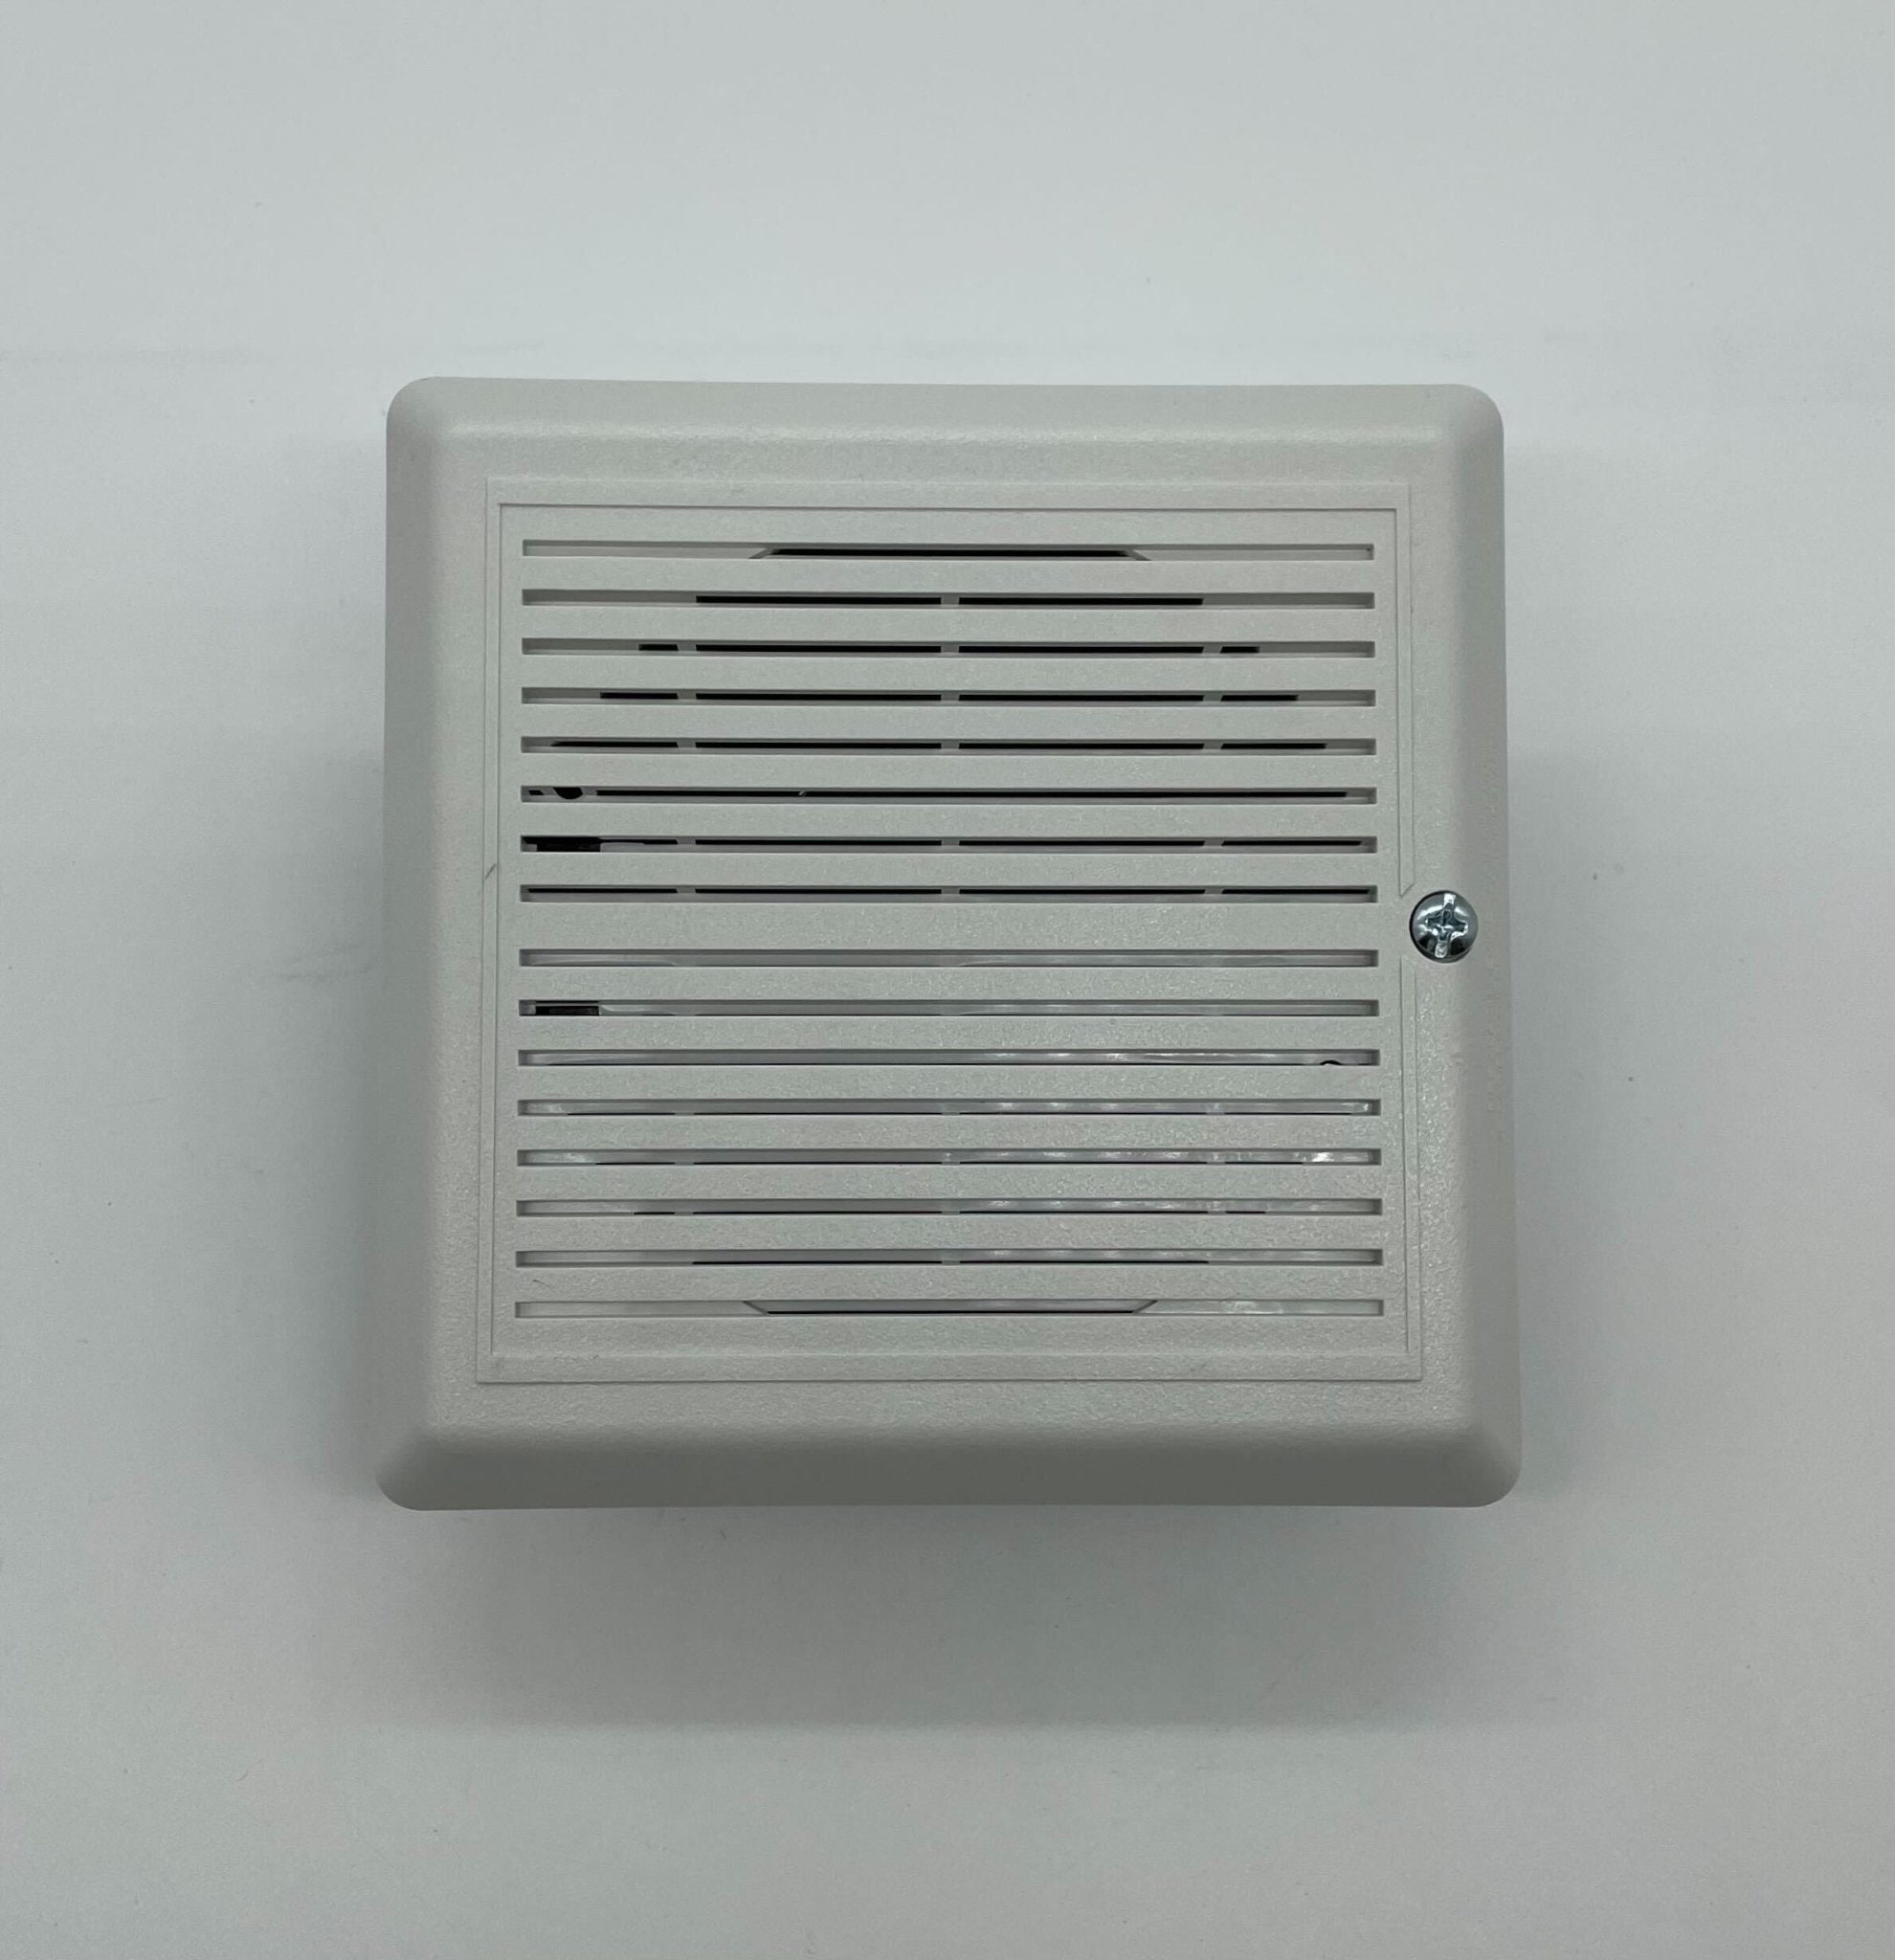 Edwards 757-1A-TW - The Fire Alarm Supplier